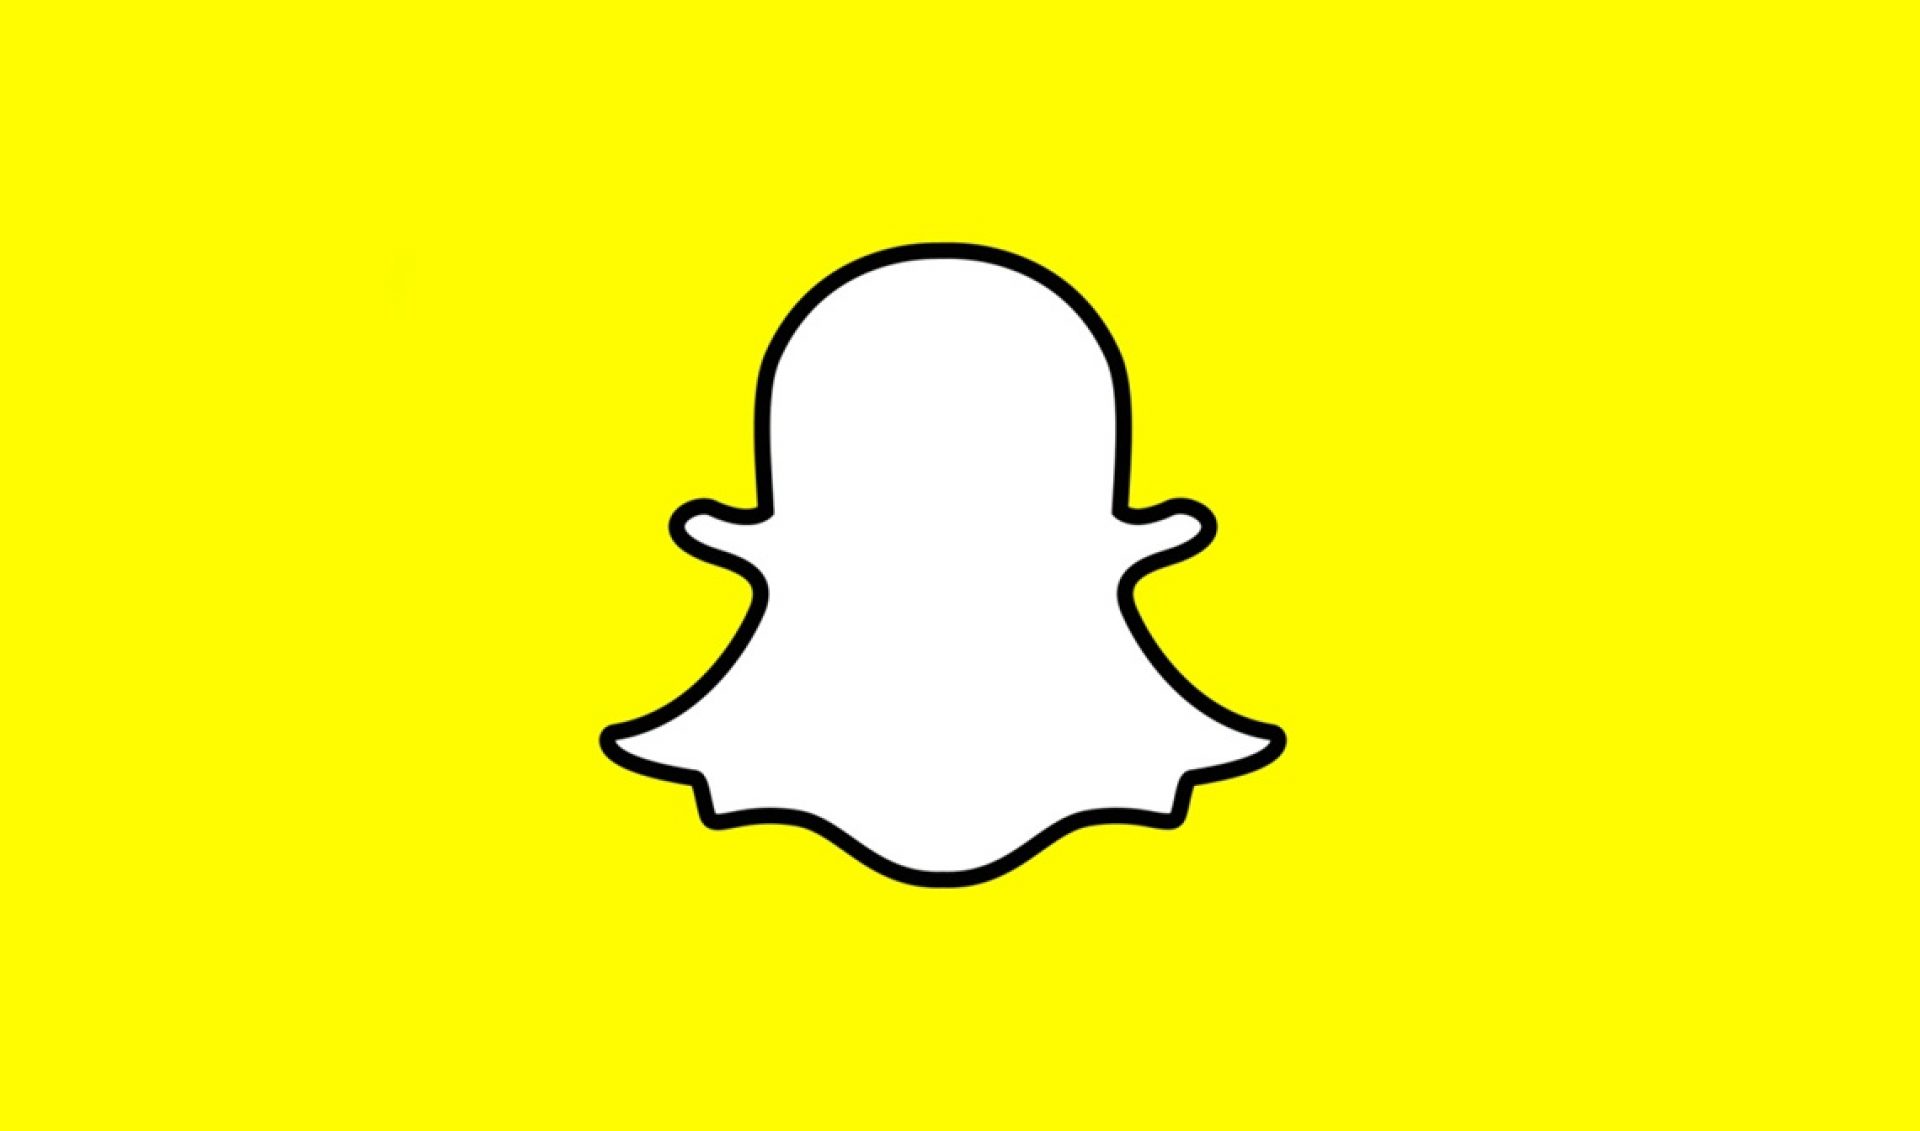 Turner’s TBS, truTV, And Adult Swim To Create Original Shows Exclusively For Snapchat